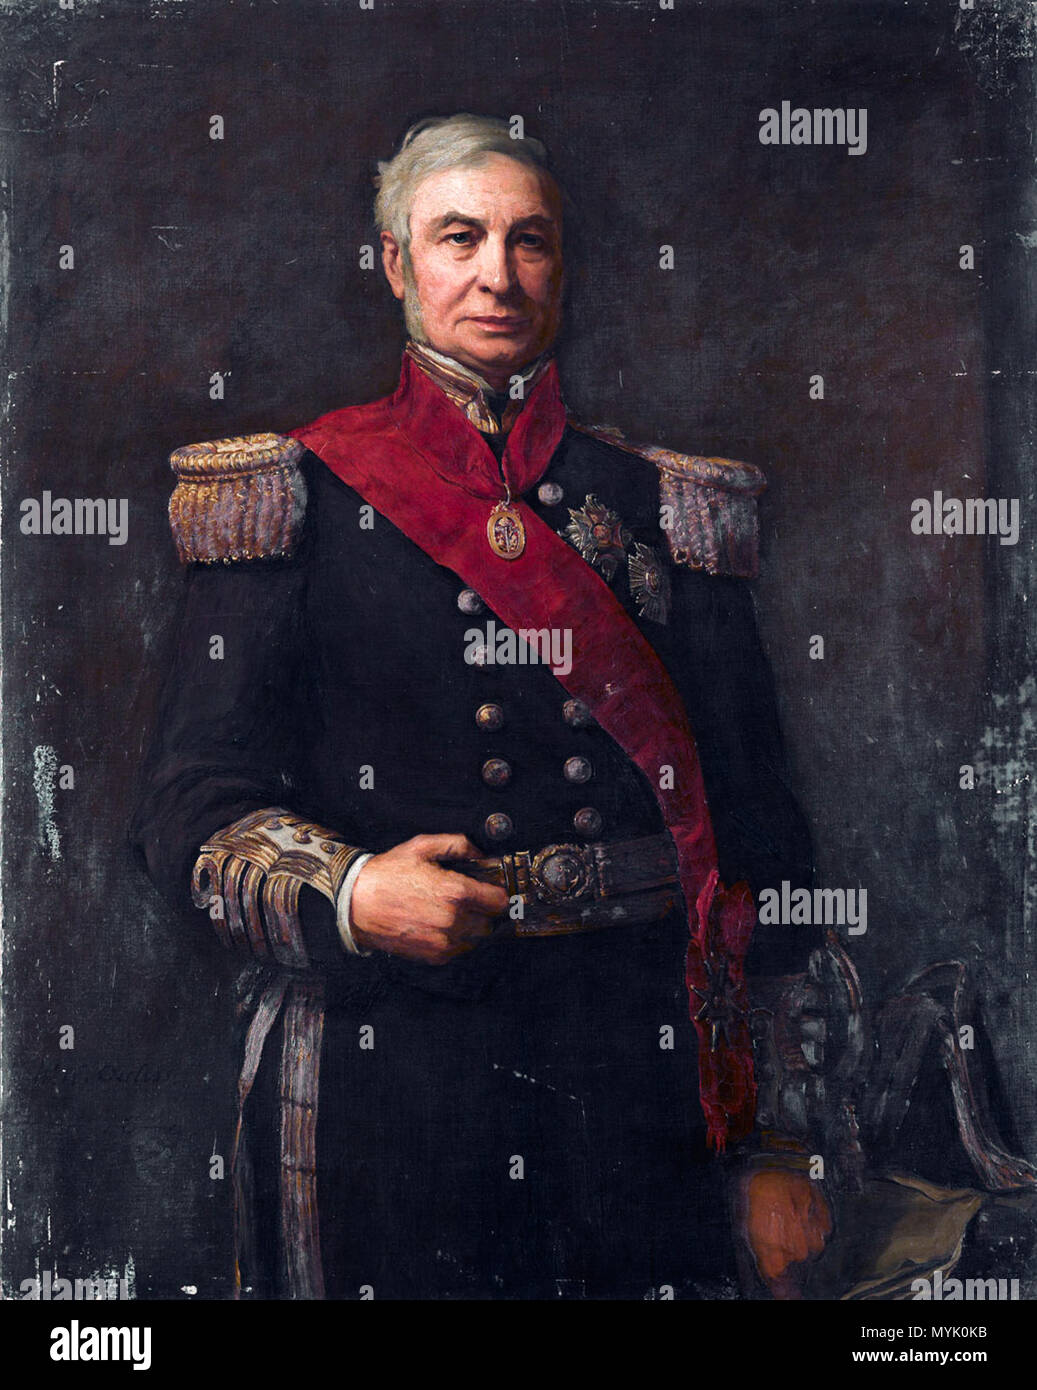 . English: Admiral Alexander Milne (1808-1896) oil on canvas 128 x 102.5 cm 1879  . 1879.   Walter William Ouless  (1848–1933)     Description English portrait painter  Date of birth/death 21 September 1848 25 December 1933  Location of birth/death Saint Helier London  Authority control  : Q7966424 VIAF: 95758598 ULAN: 500012705 RKD: 61234 23 Admiral Alexander Milne (1808-1896), by Walter William Ouless Stock Photo